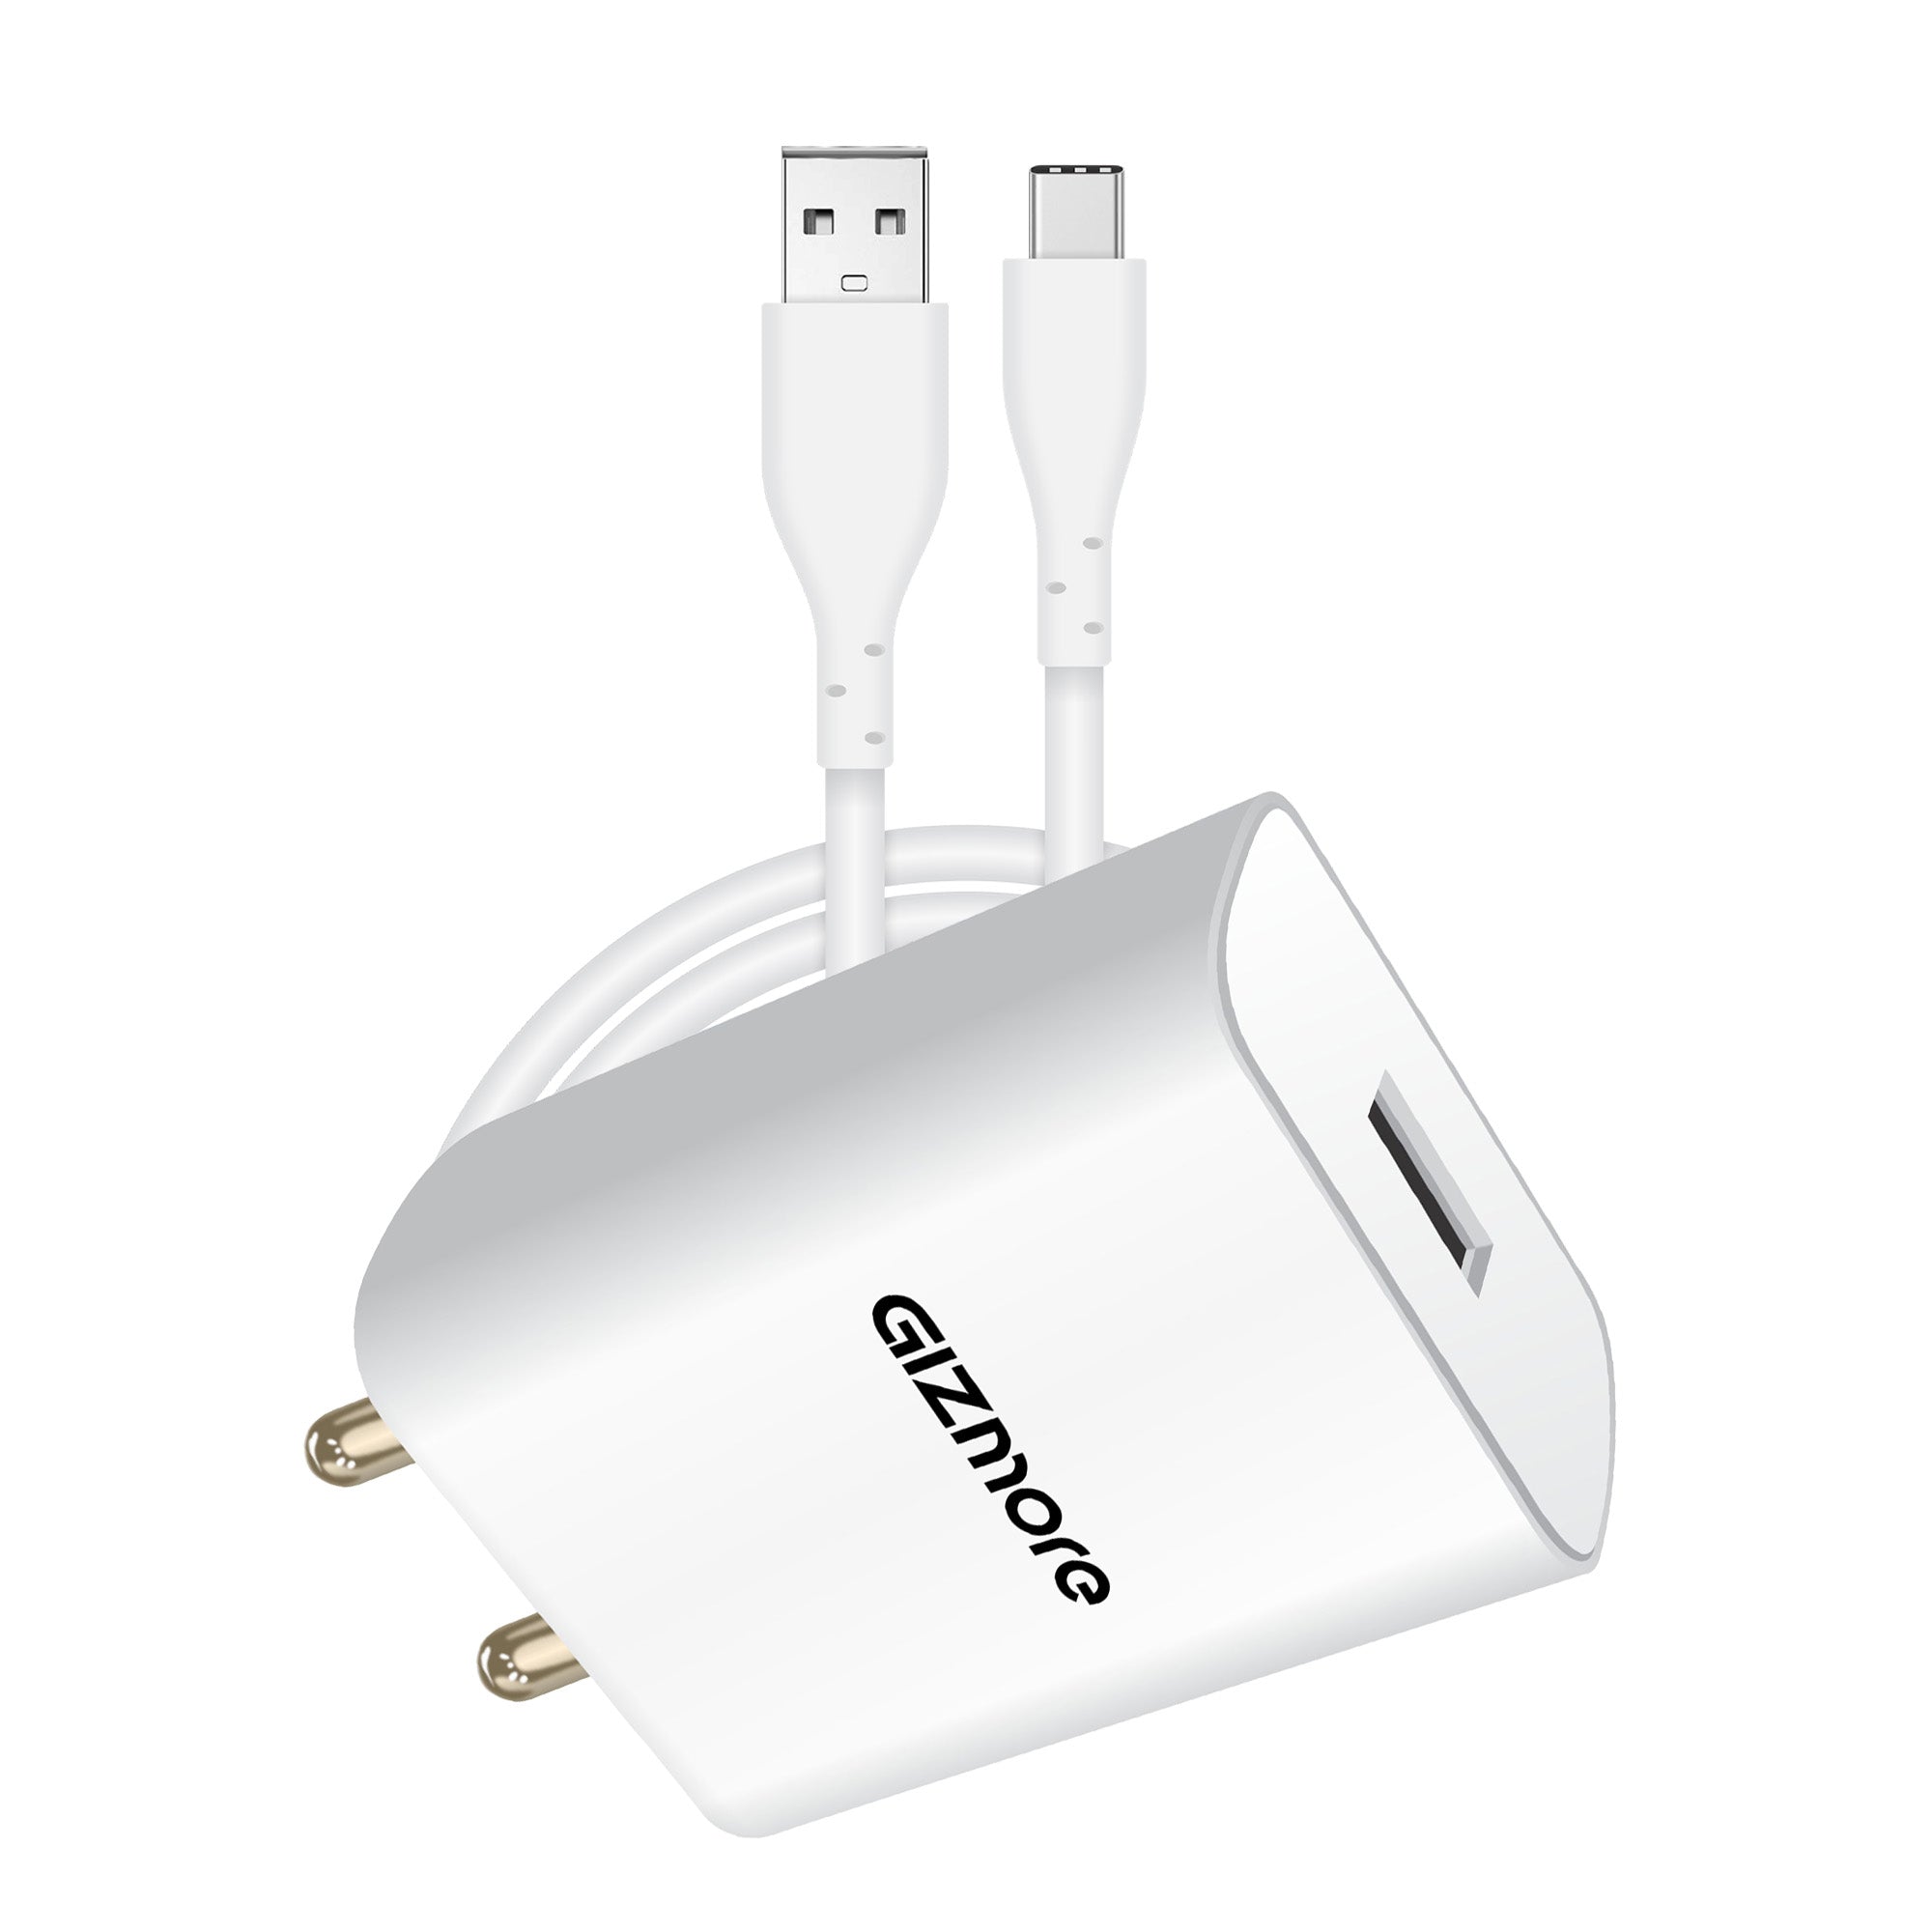 GIZMORE 44W FLASH & SUPER VOOC USB Fast Charger Adapter Compatible with All Smartphones, Compact & Lightweight with Secure Charging, Versatile Protocol QC2.0/QC3.0/AFC, SUPERVOOC/ DASH/ WARP/DART and FLASH with Cable